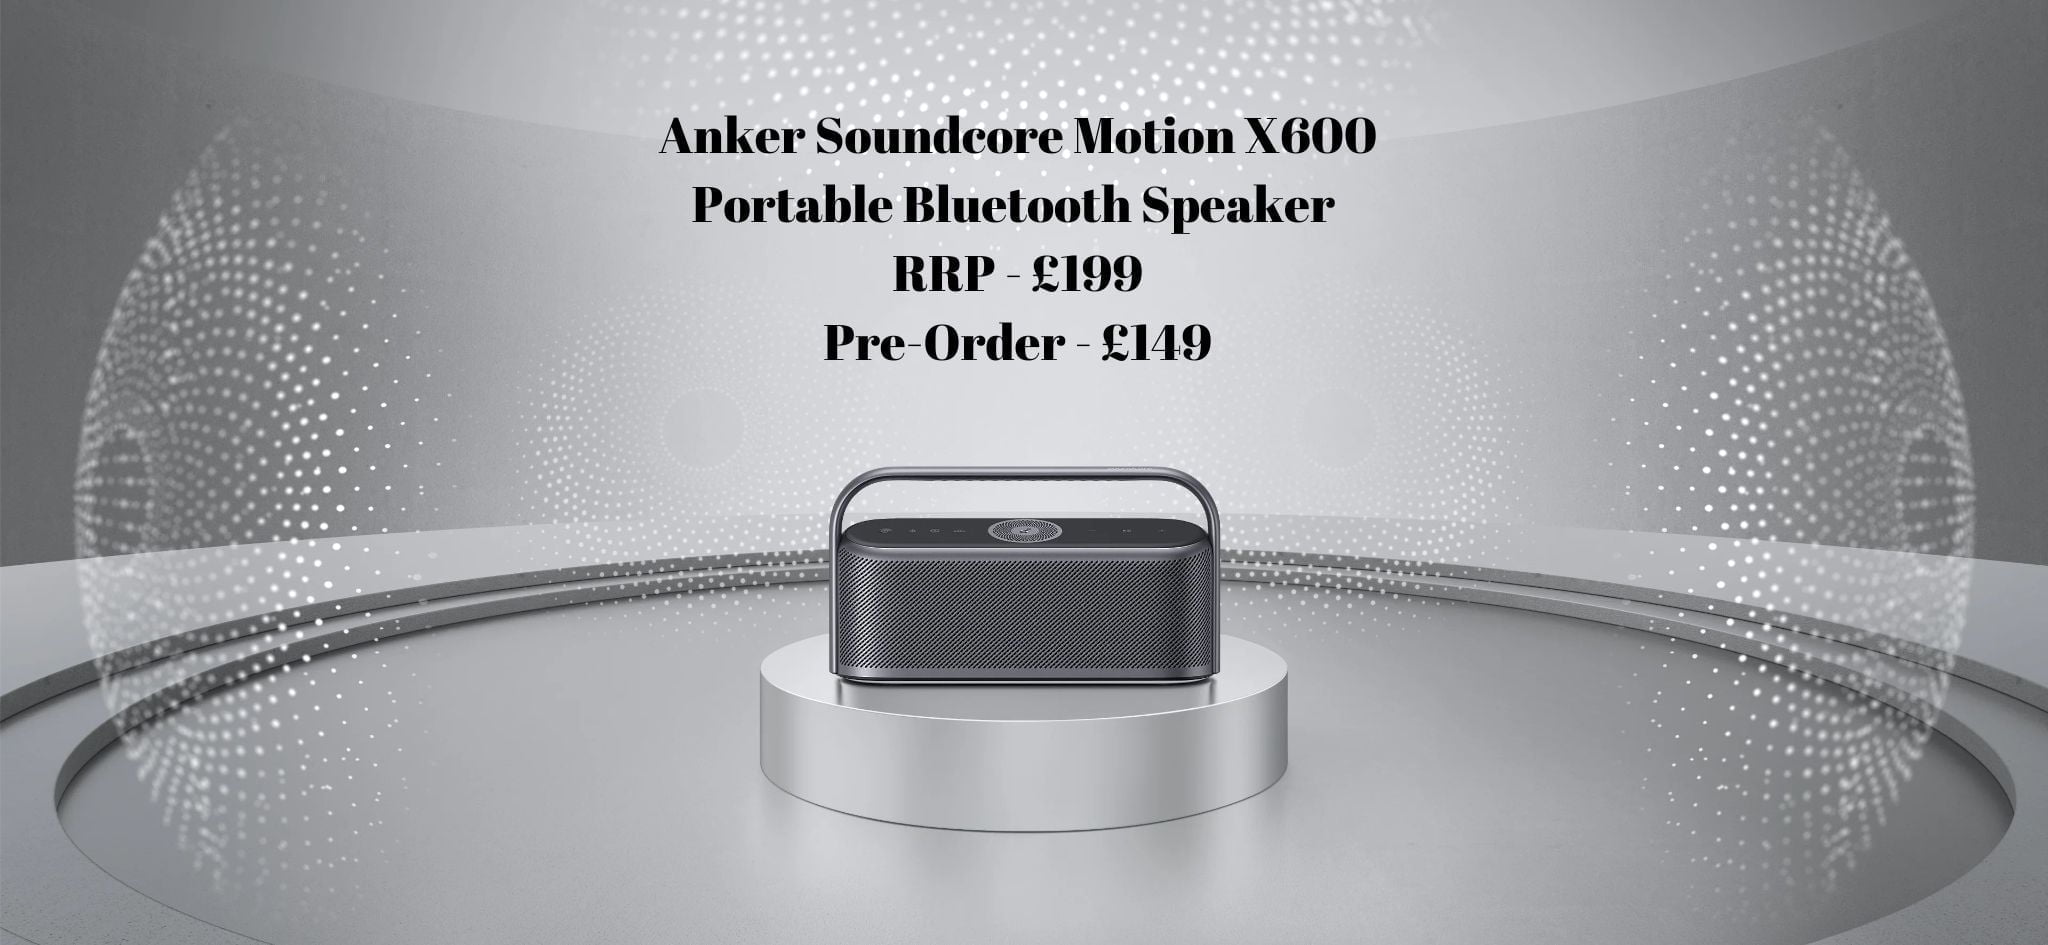 Anker Soundcore Motion X600 Portable High Fidelity Speaker with Spatial Sound Announced for £200 – Pre-order to get it for £150